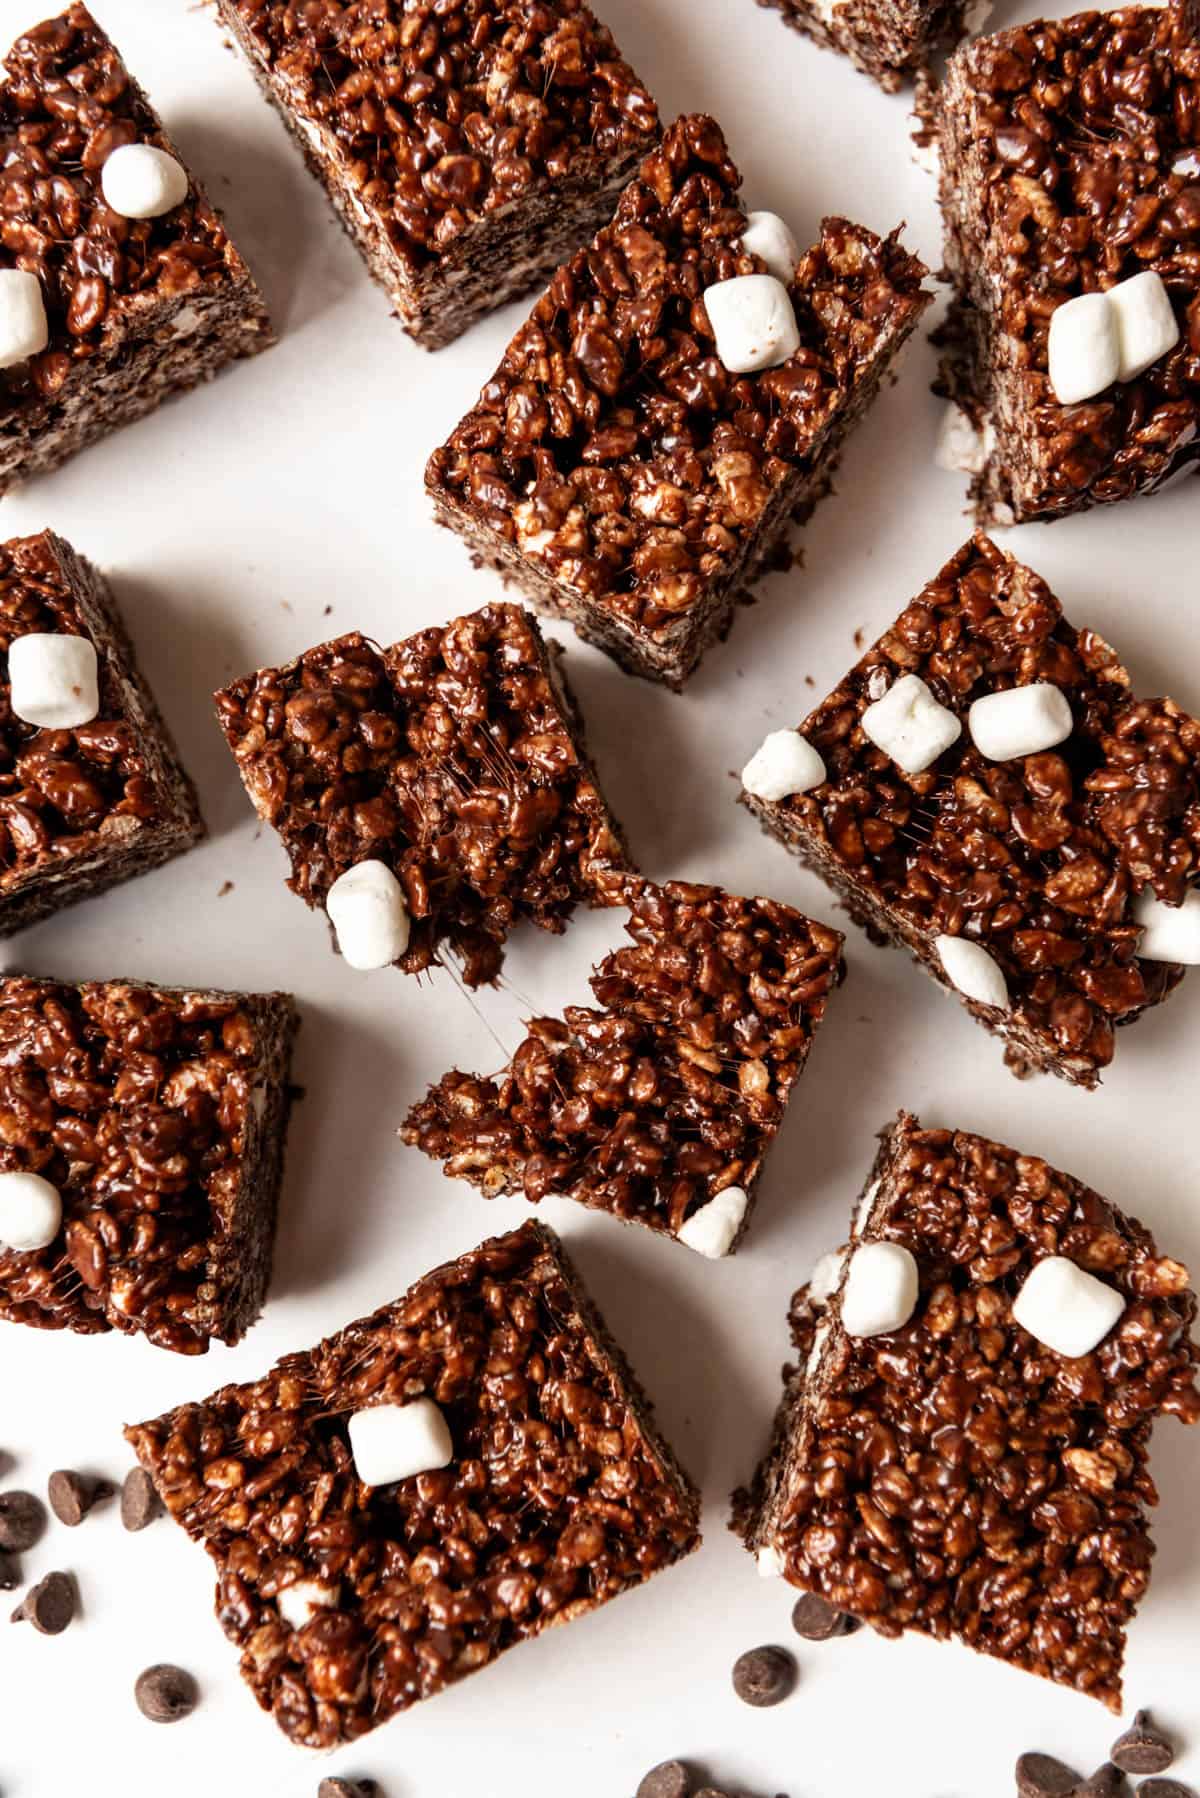 An overhead image of chocolate rice krispie treat squares.